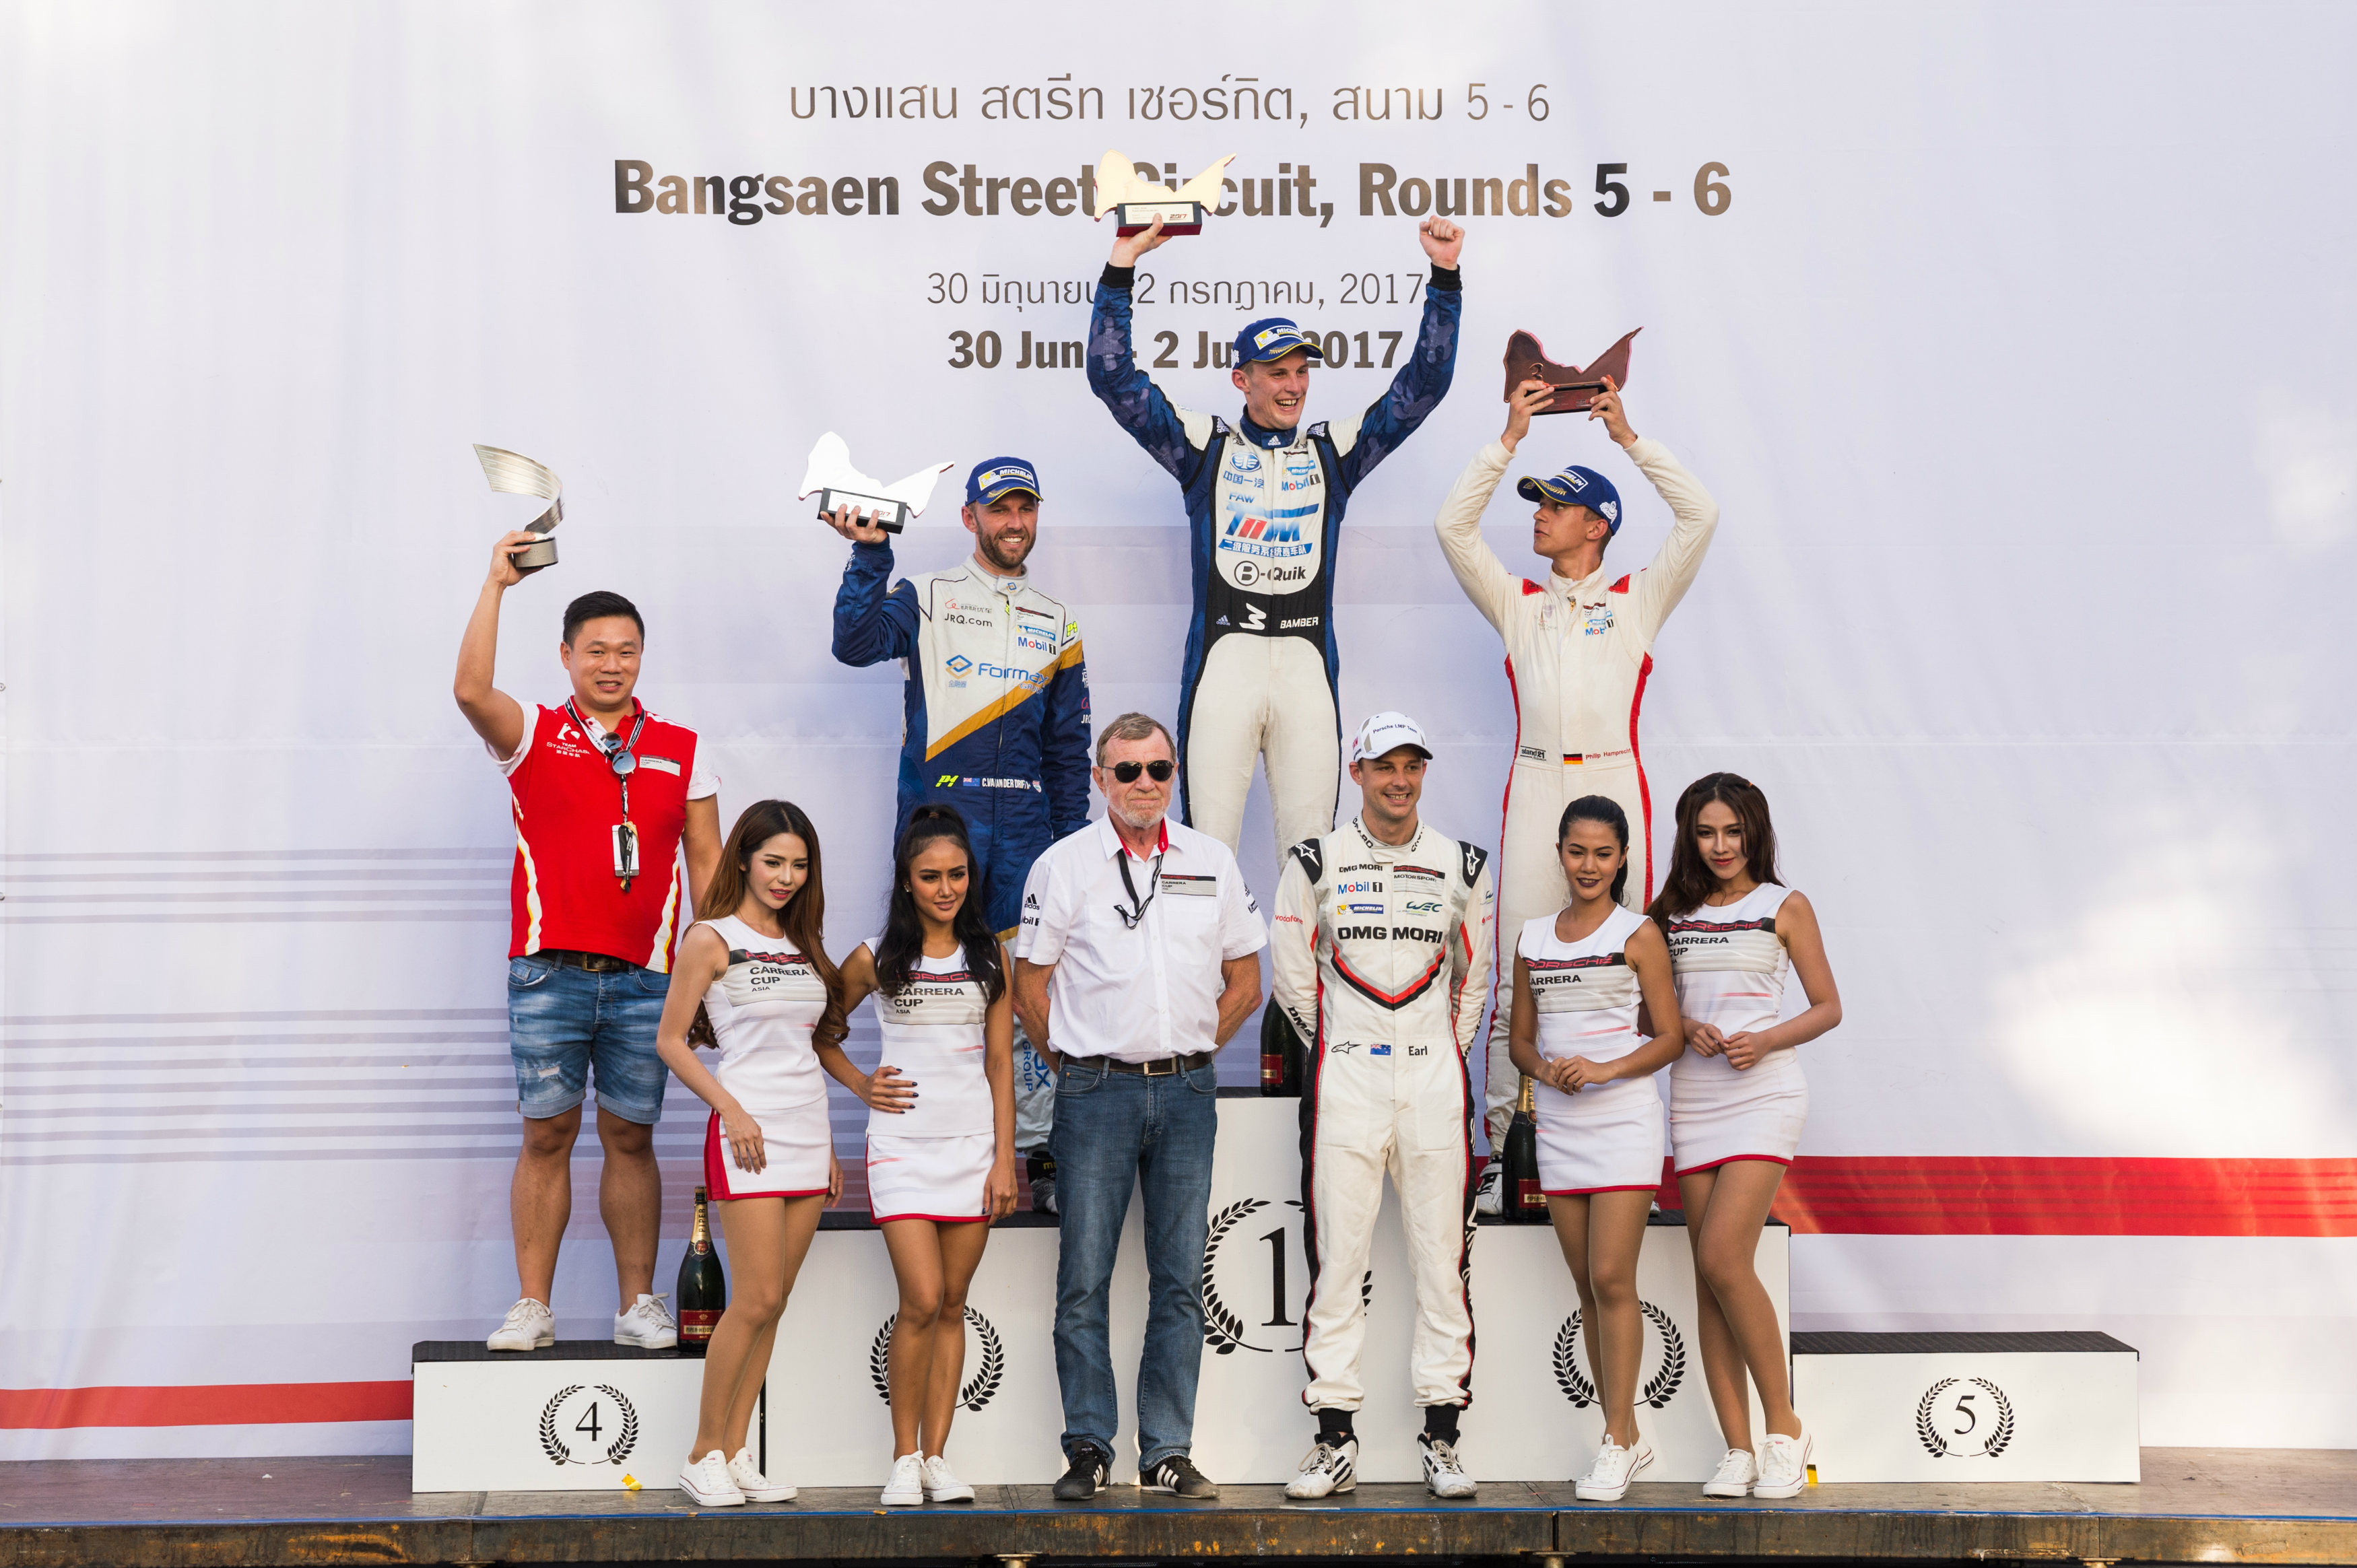 Perfection for Will Bamber with Bangsaen Carrera Cup clean sweep